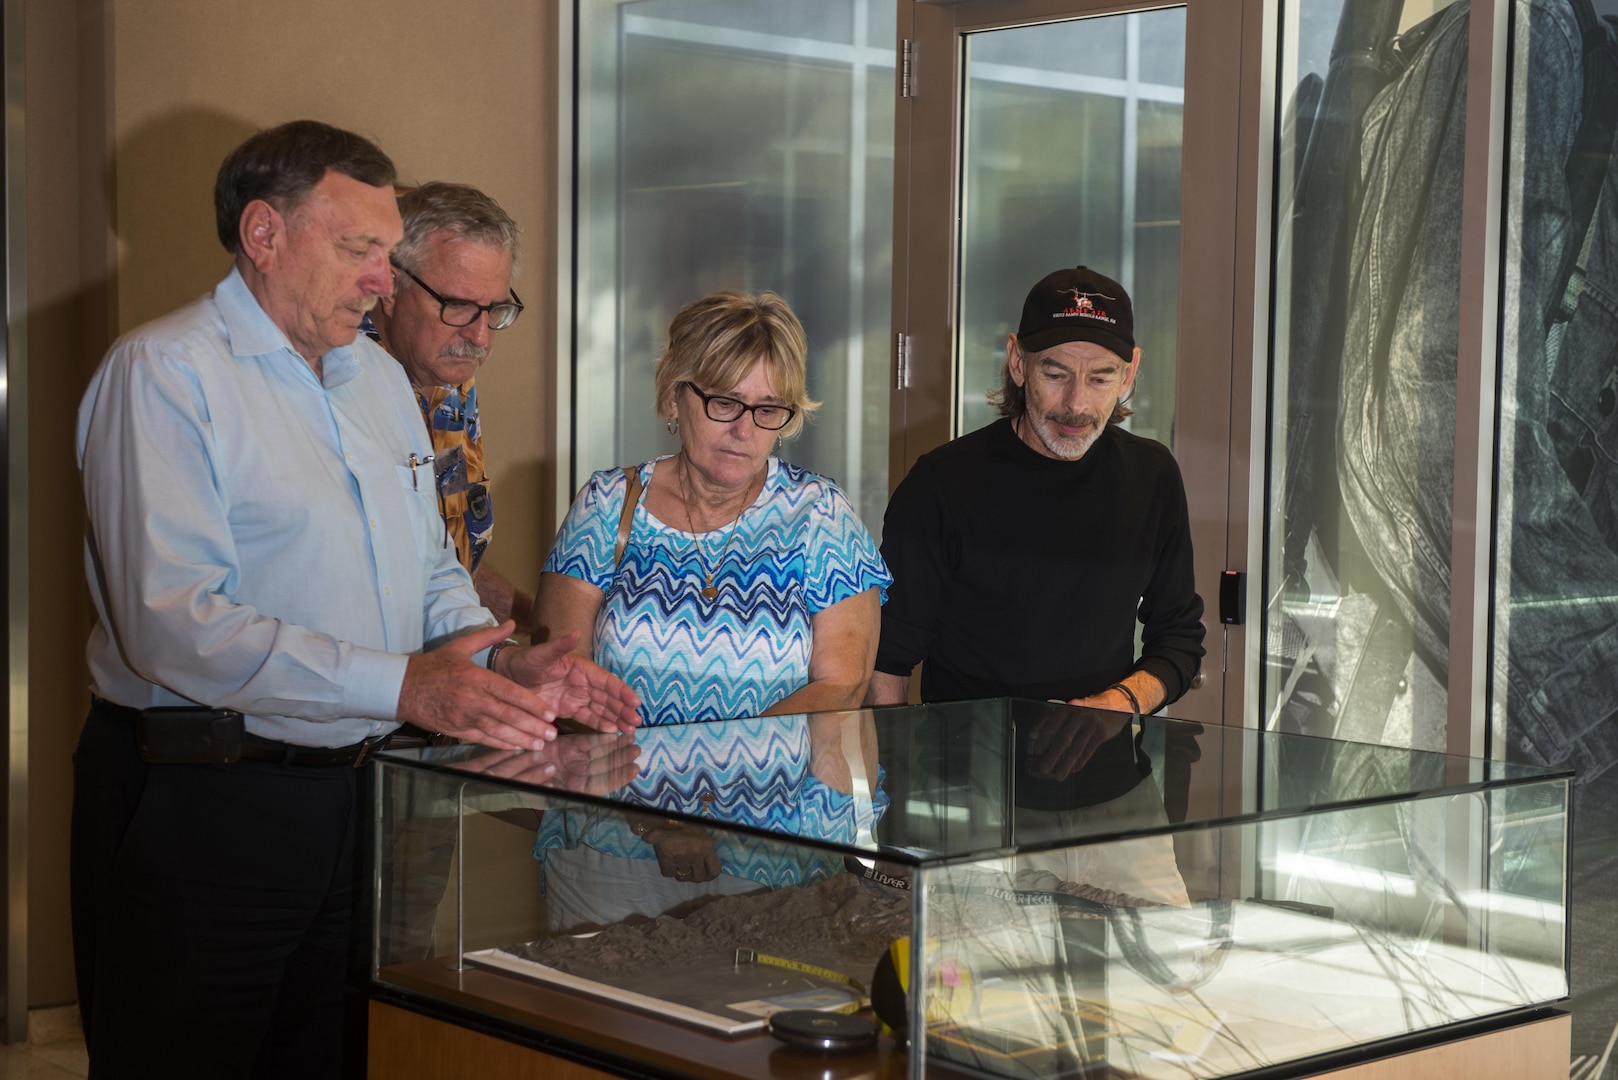 Family and friends of a World War II prisoner of war visit the Defense POW/MIA Accounting Agency (DPAA) for a tour of the facility, June 30. The mission of DPAA is to provide the fullest possible accounting for our missing personnel to their families and the nation